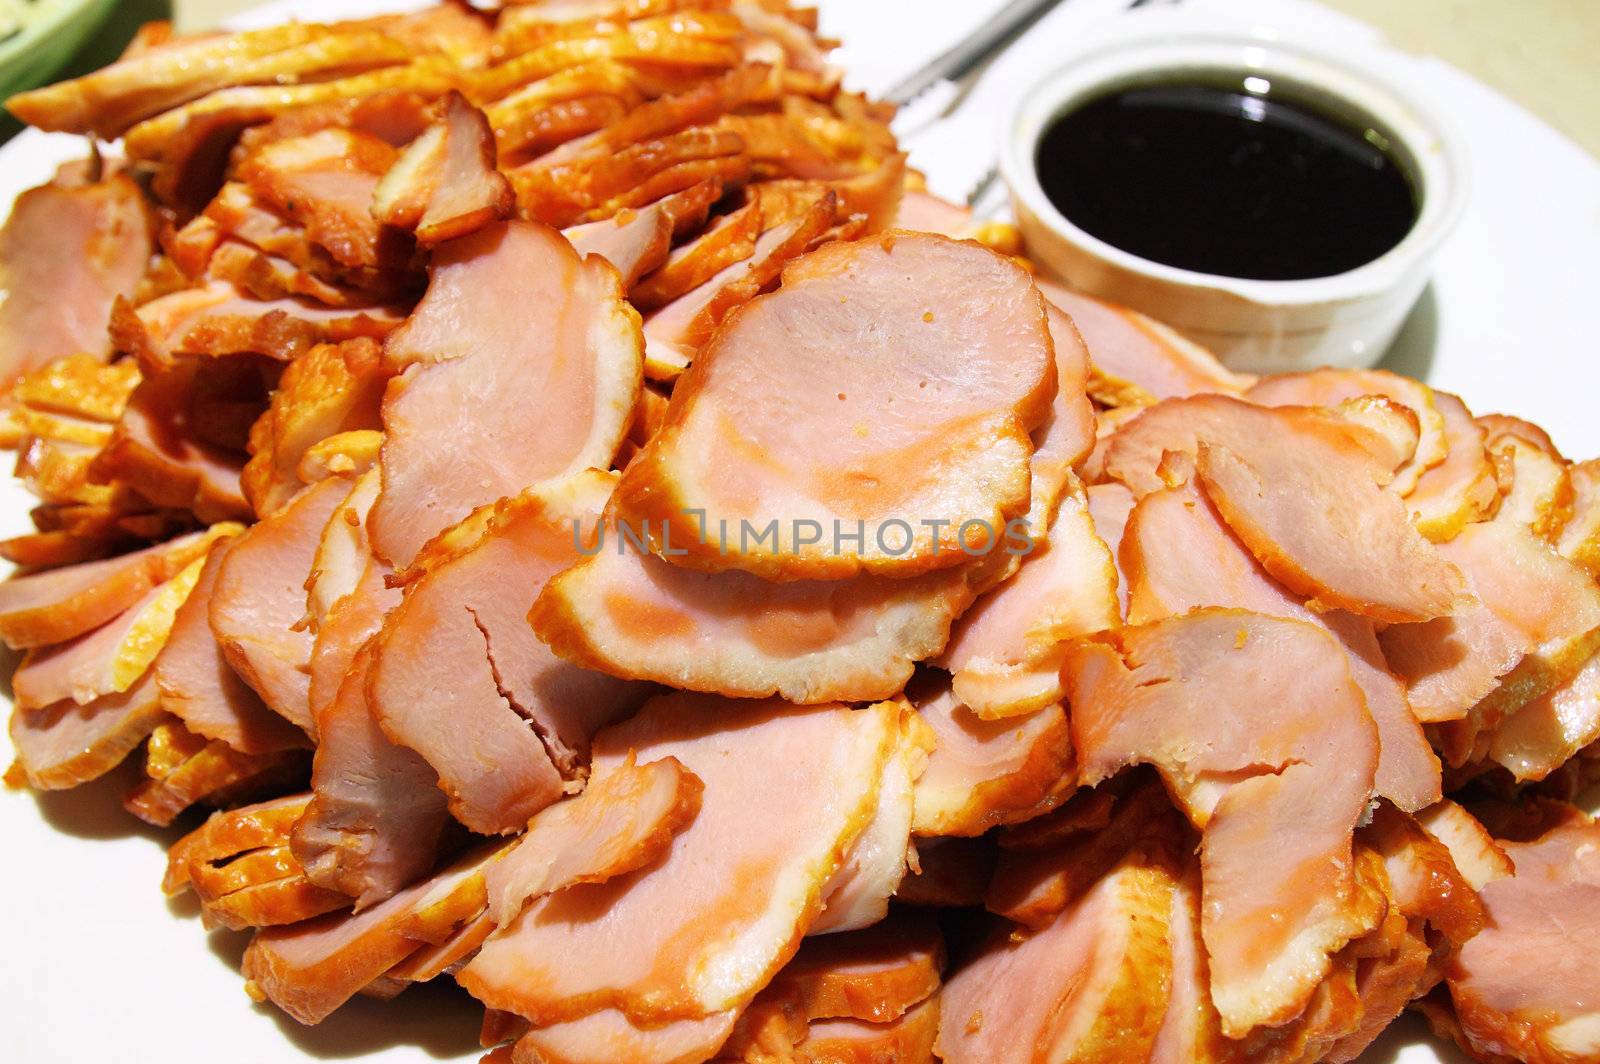 Slices of pork bacon with sauce